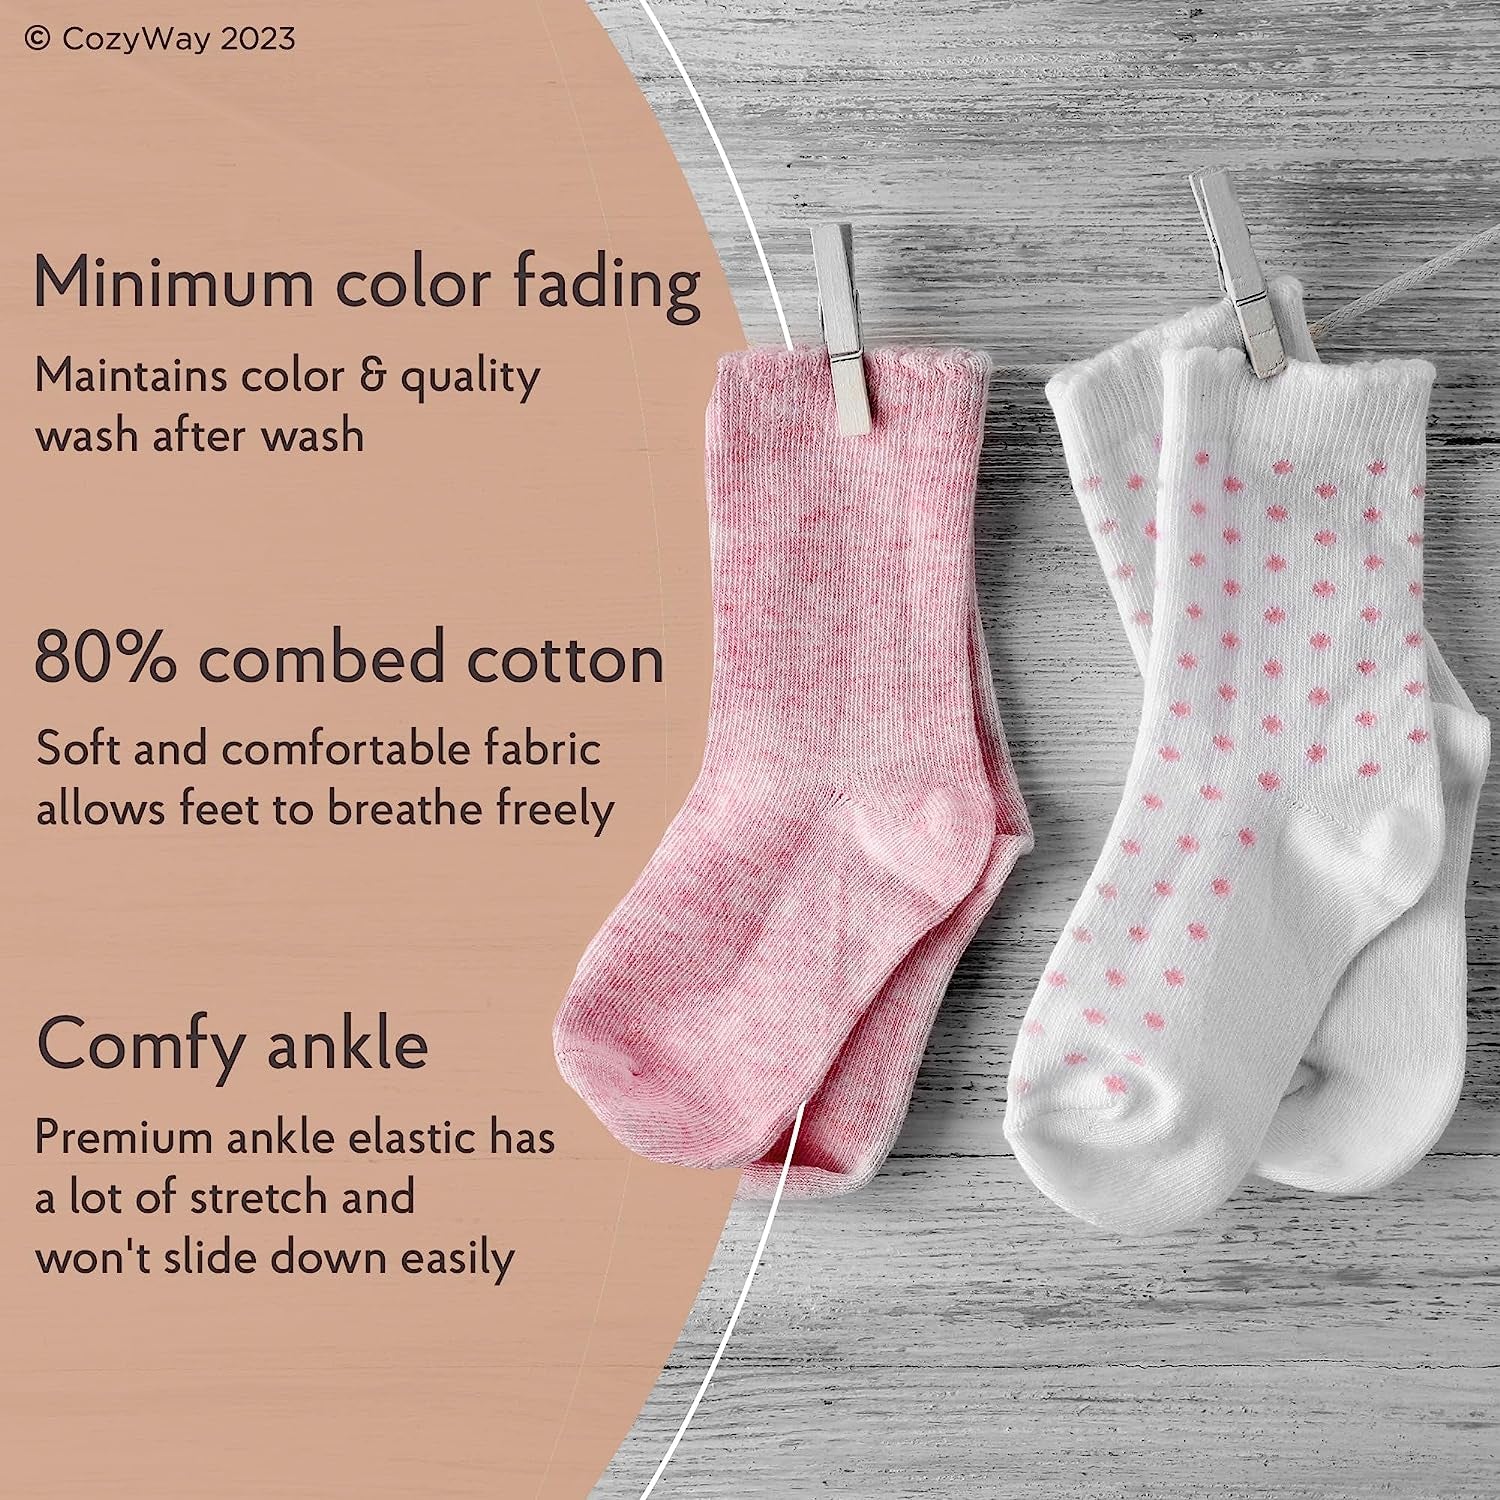 Ankle Style Socks with Grippers for Little Girls & Boys, Infants, Toddlers, Children - 6 & 9 Pairs